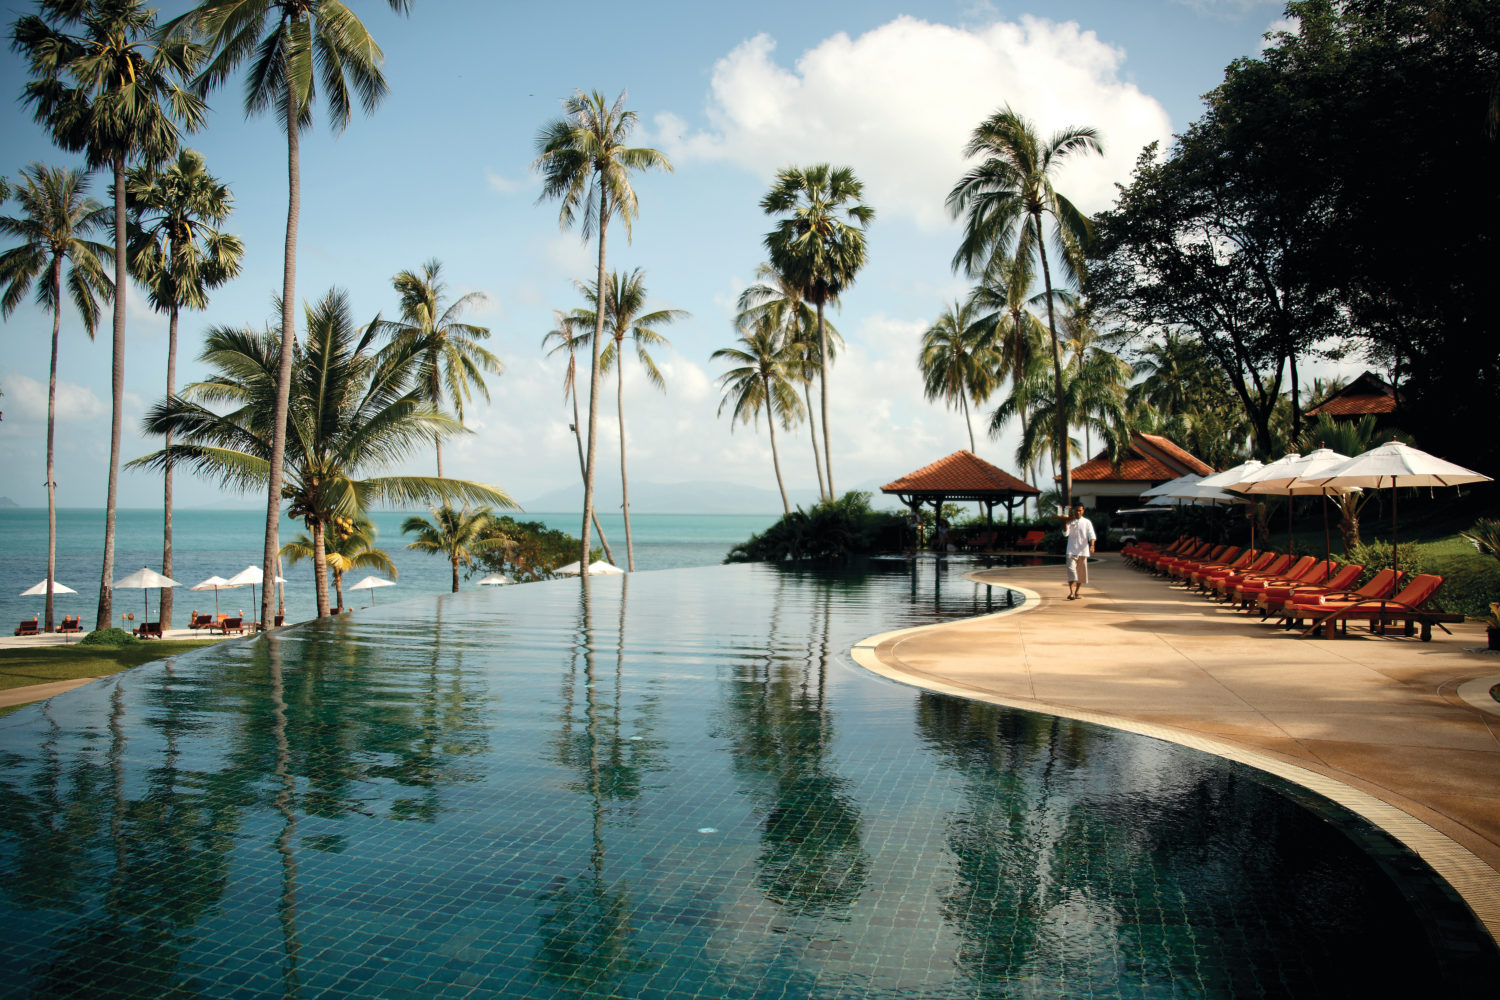 Nick Walton escapes from the world at one of Thailand’s most esteemed beachfront resorts, Belmond Napasai